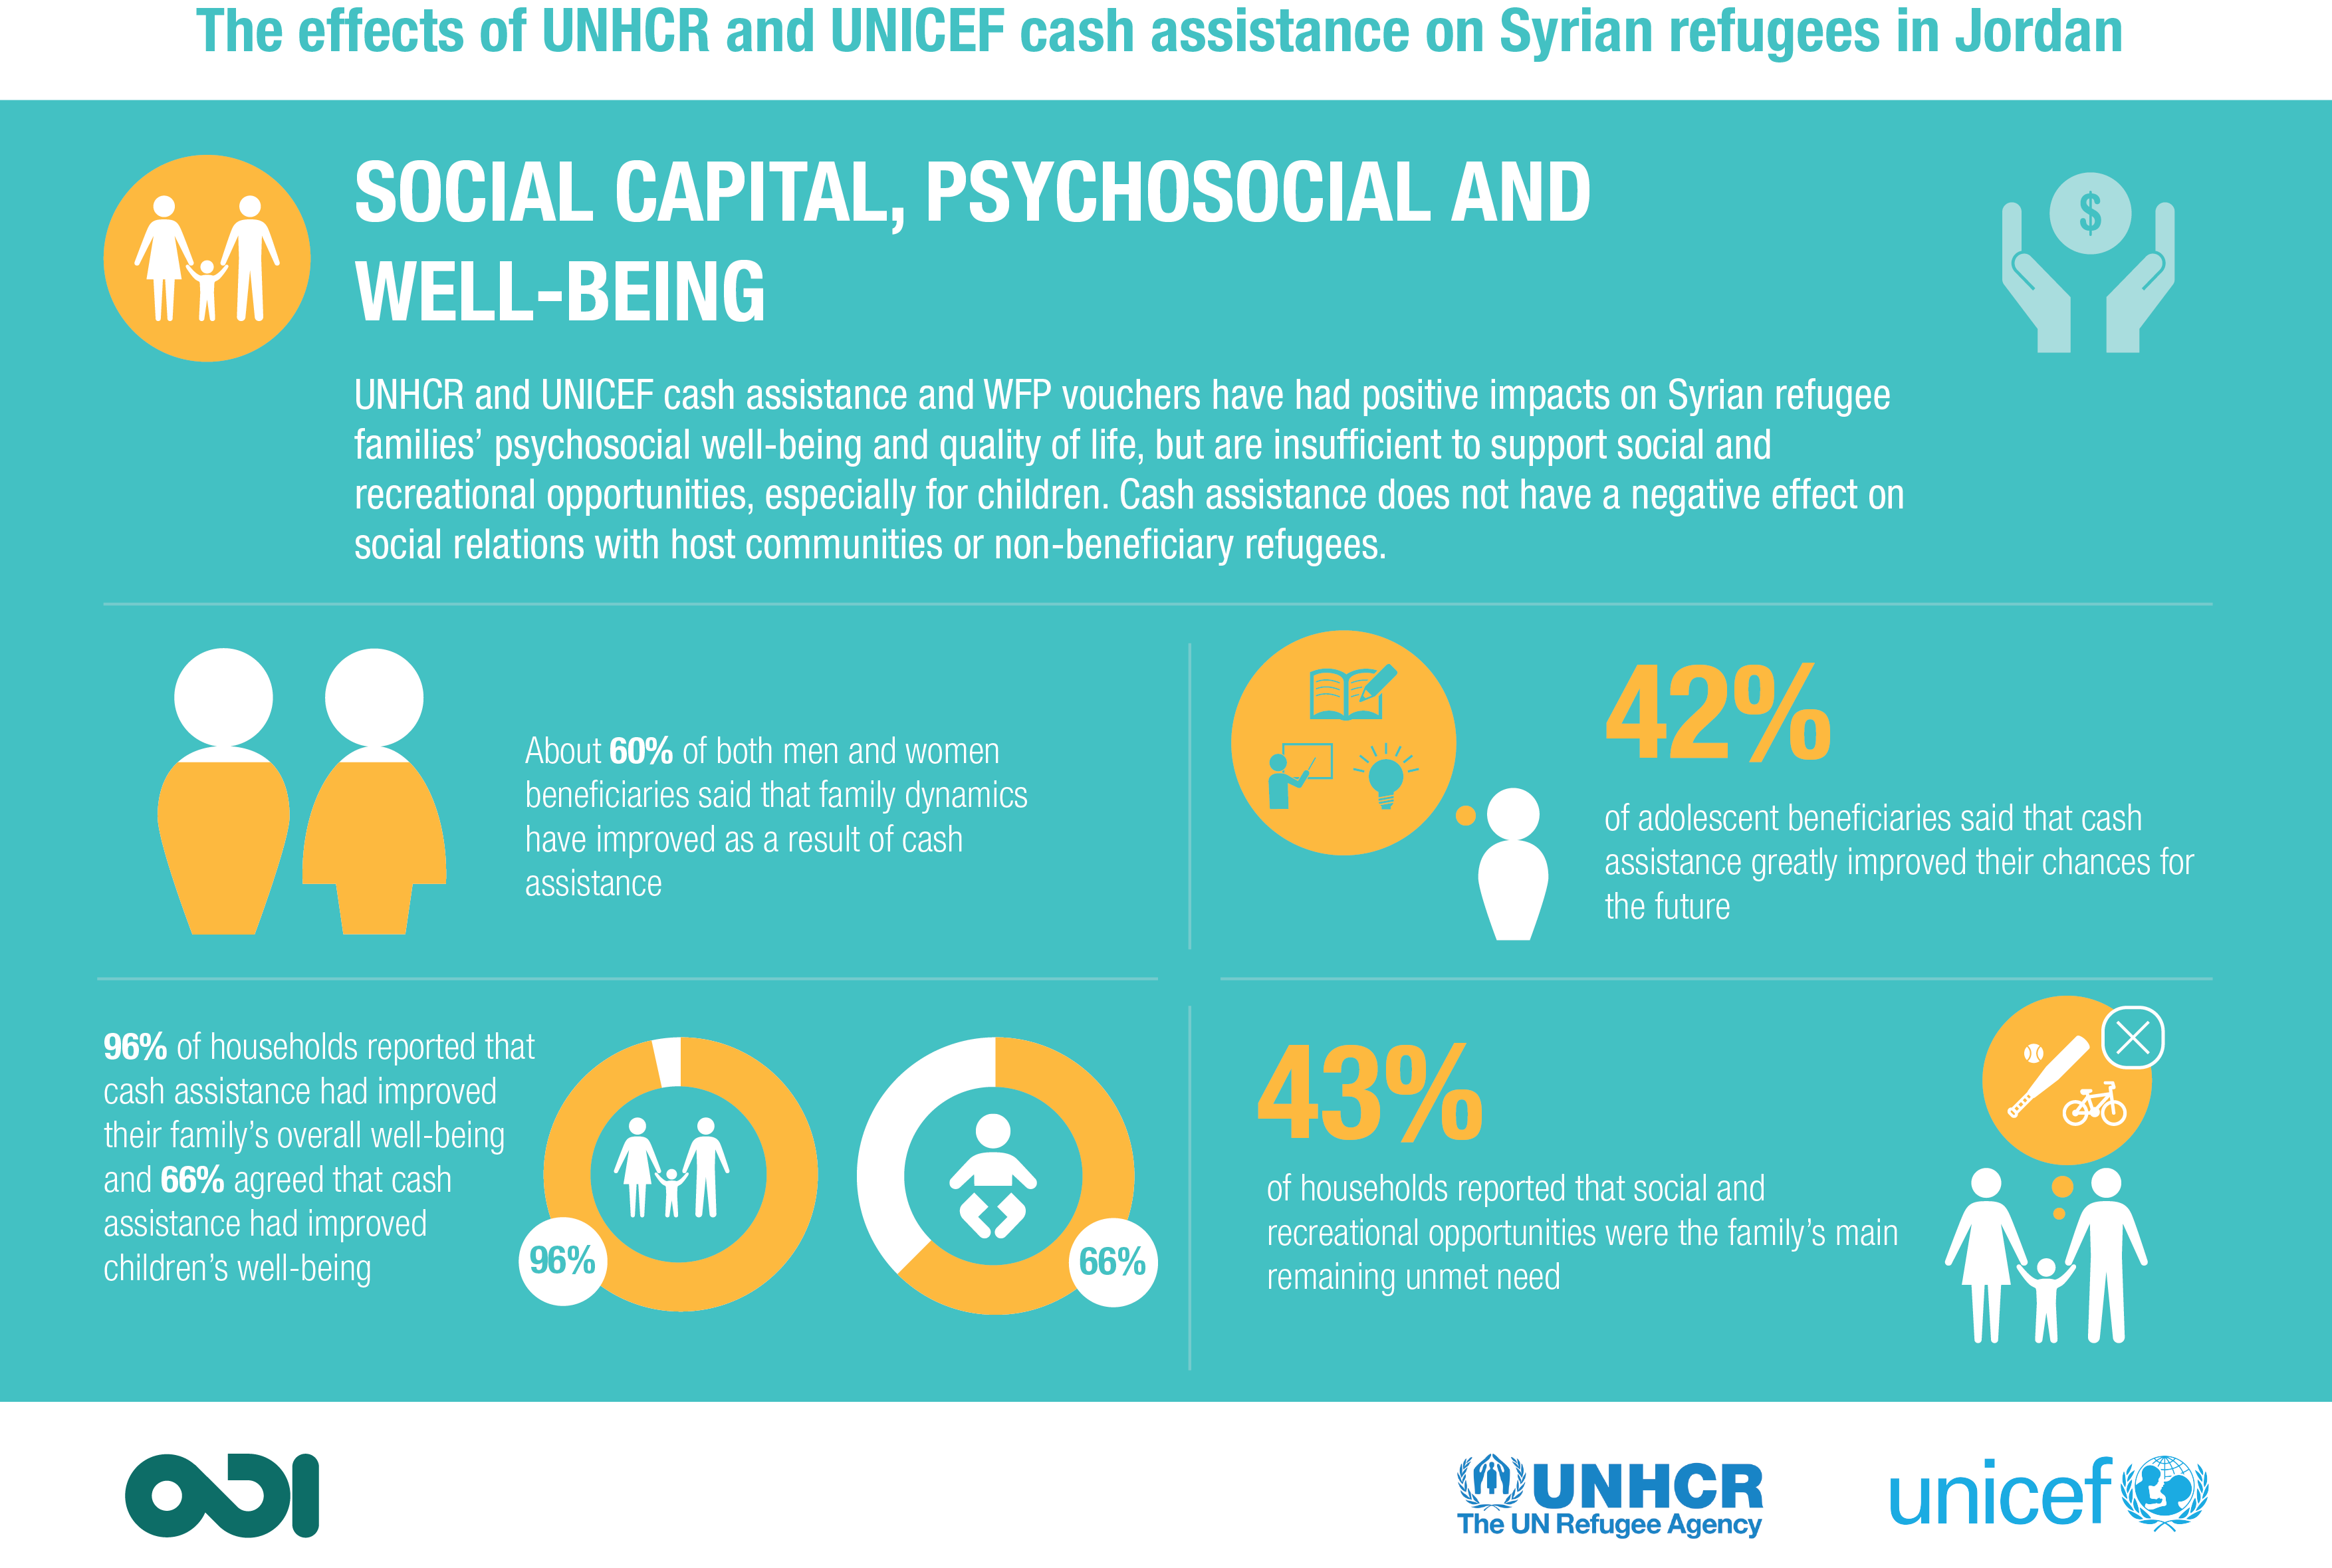 Social capital, psychosocial and well-being